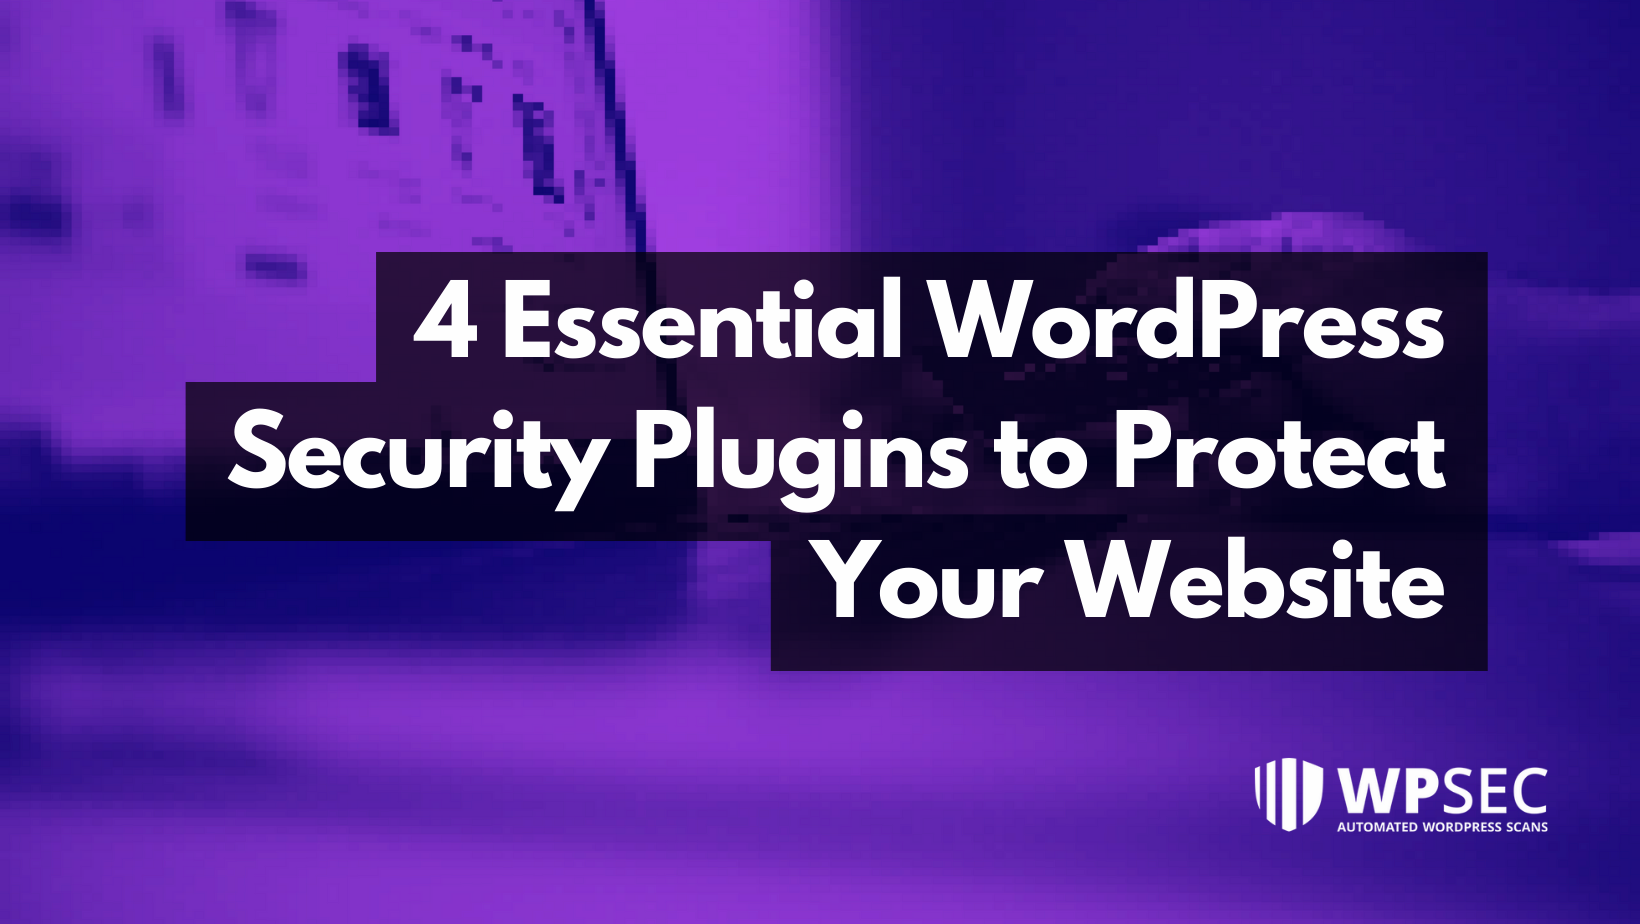 4 Essential WordPress Security Plugins to Protect Your Website